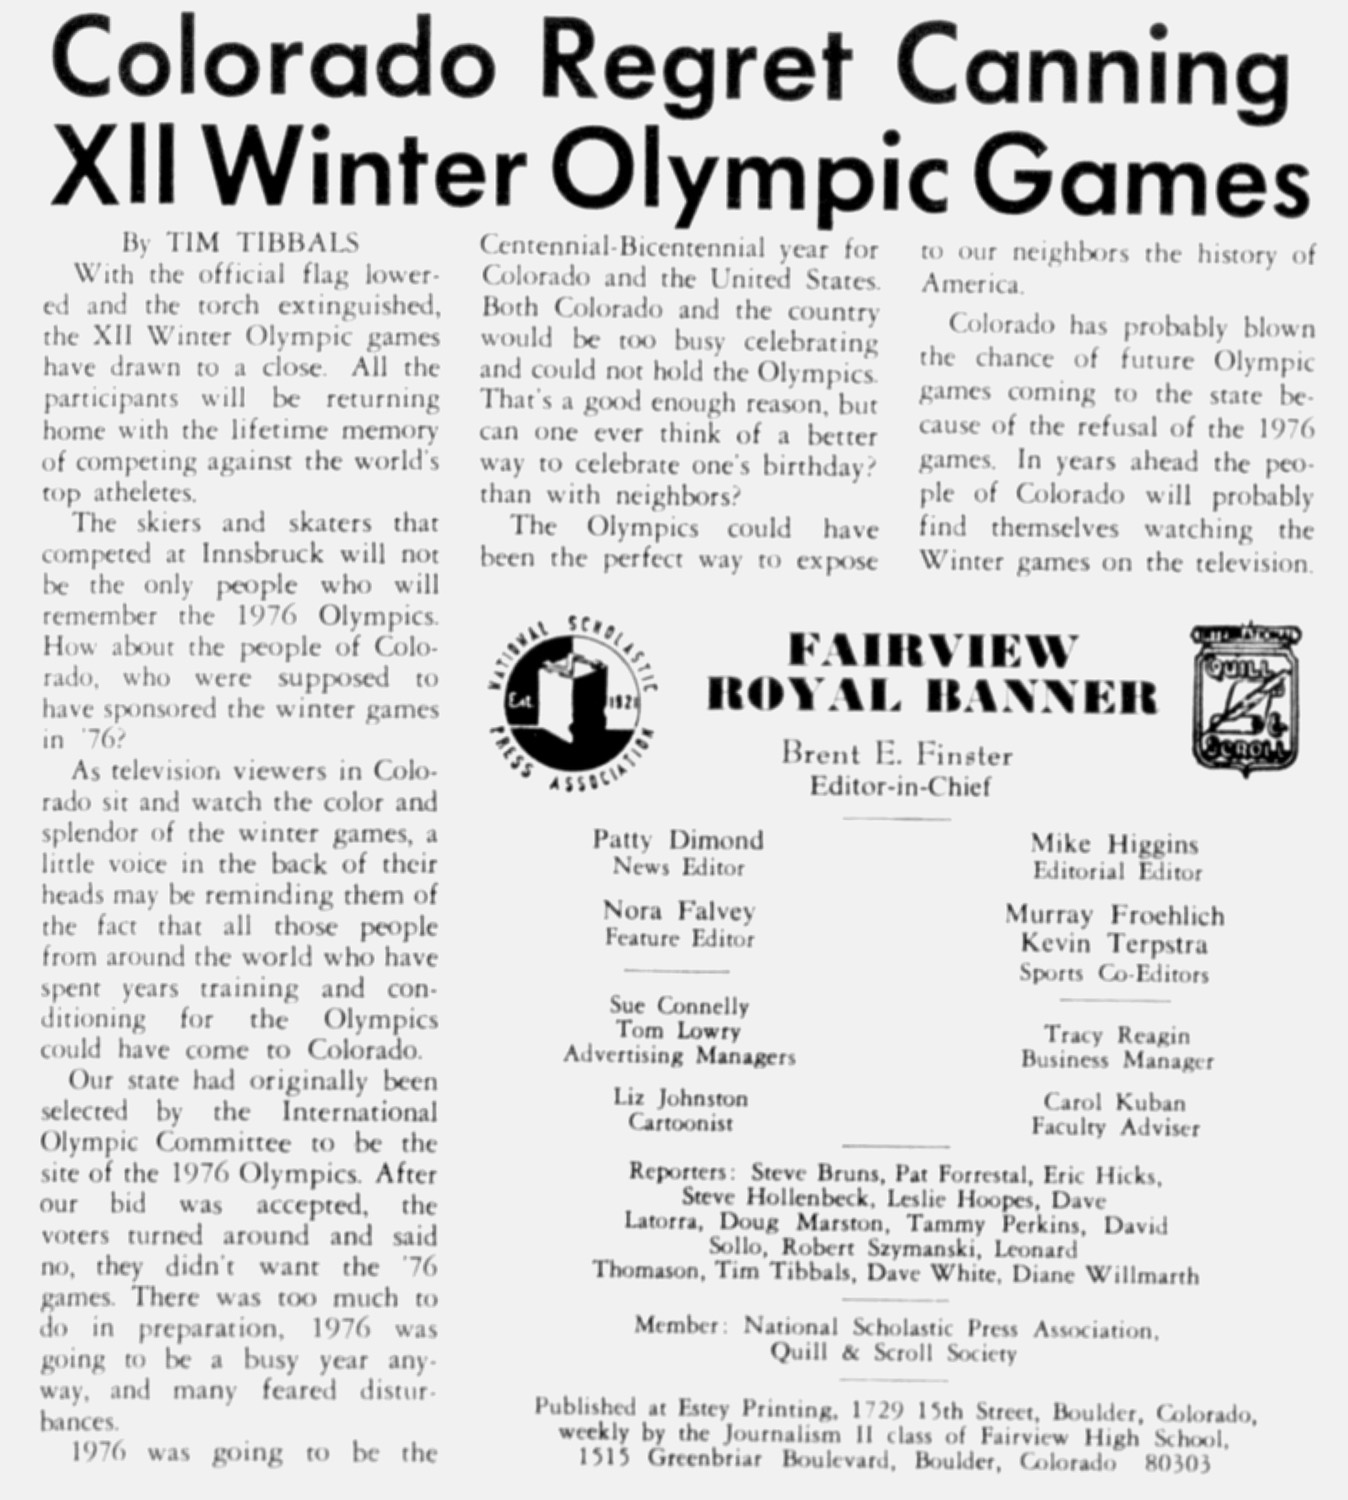 Article from the Fairview Royal Banner from Fairview High School in Boulder, giving insight into what the younger generation thought about the rejection of the Olympics